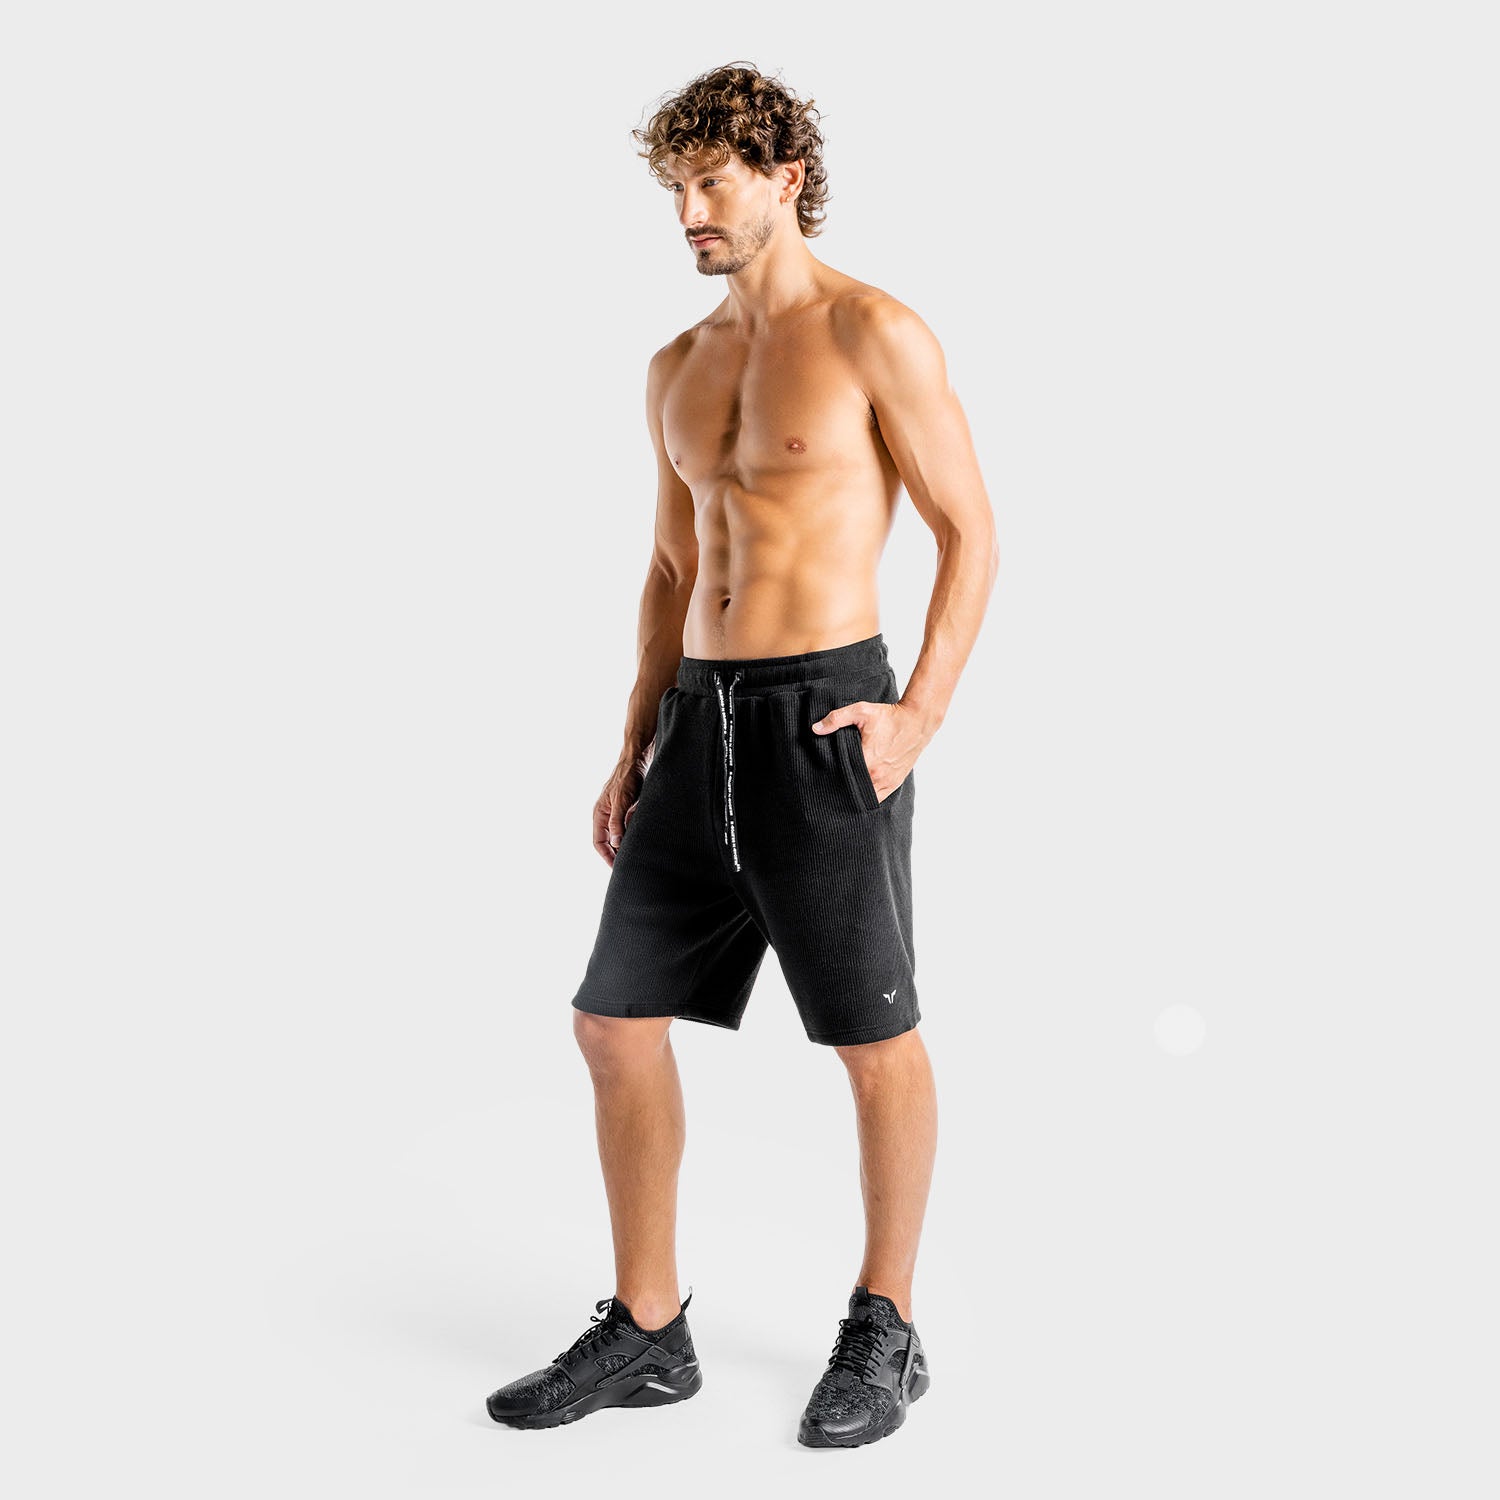 squatwolf-gym-wear-luxe-shorts-black-workout-shorts-for-men